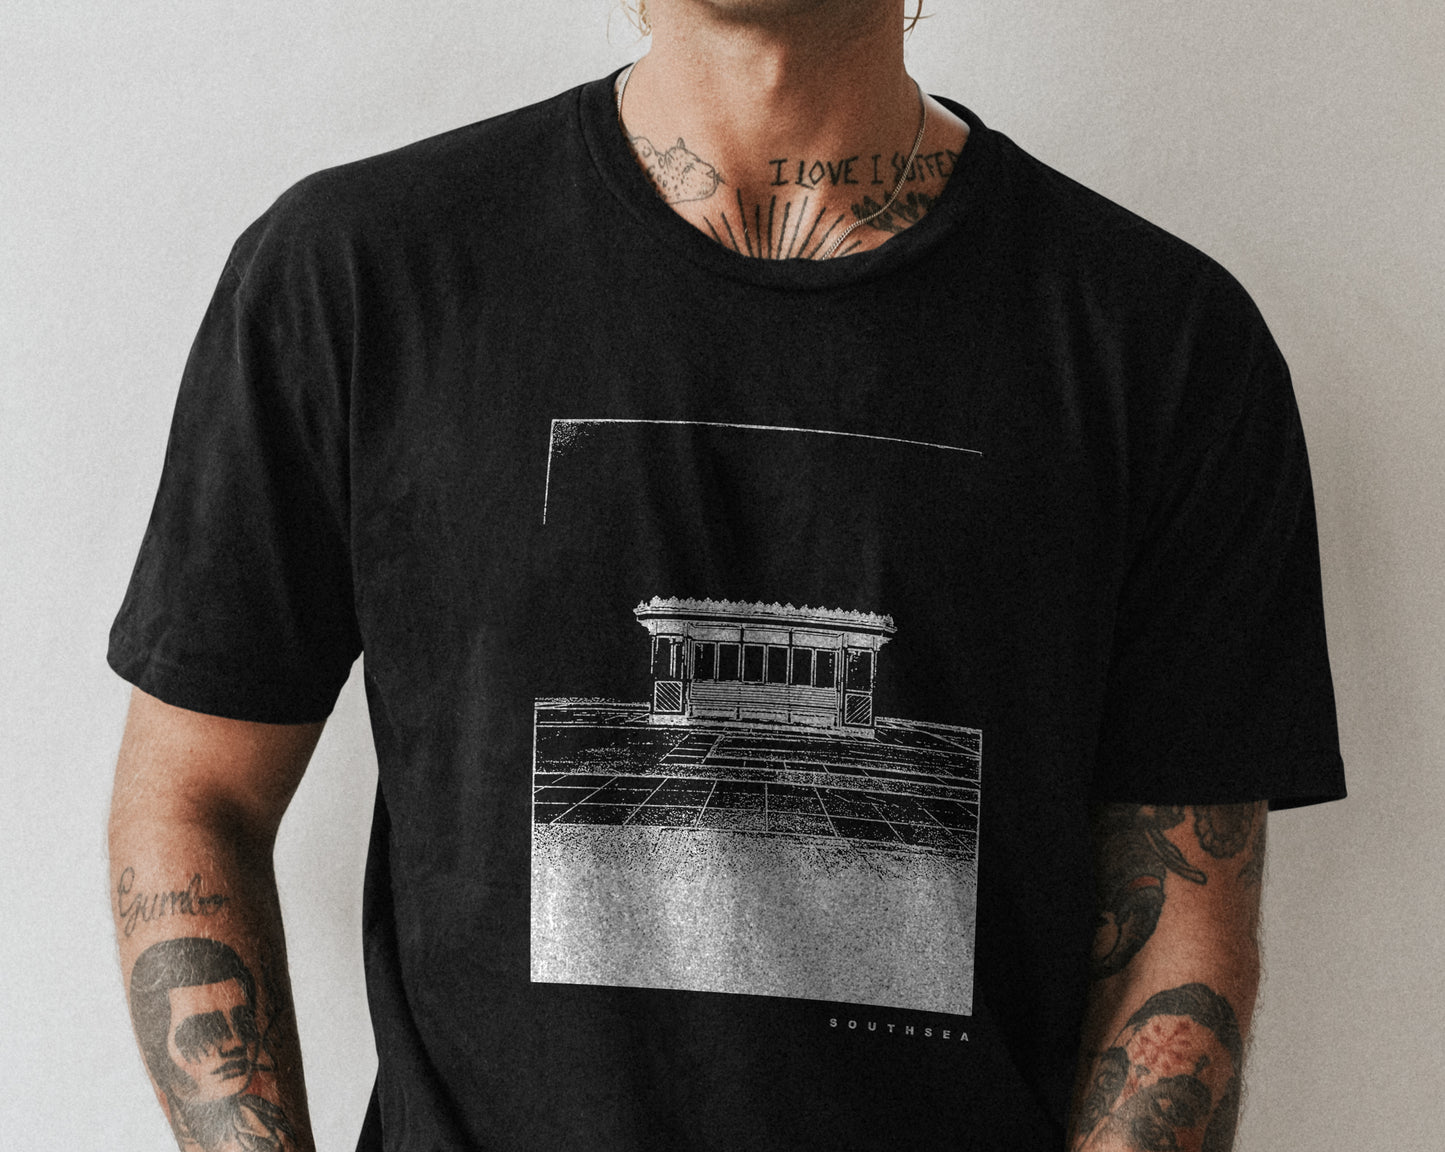 Southsea Sketch Tee - Available on White/Grey/Black T-Shirts